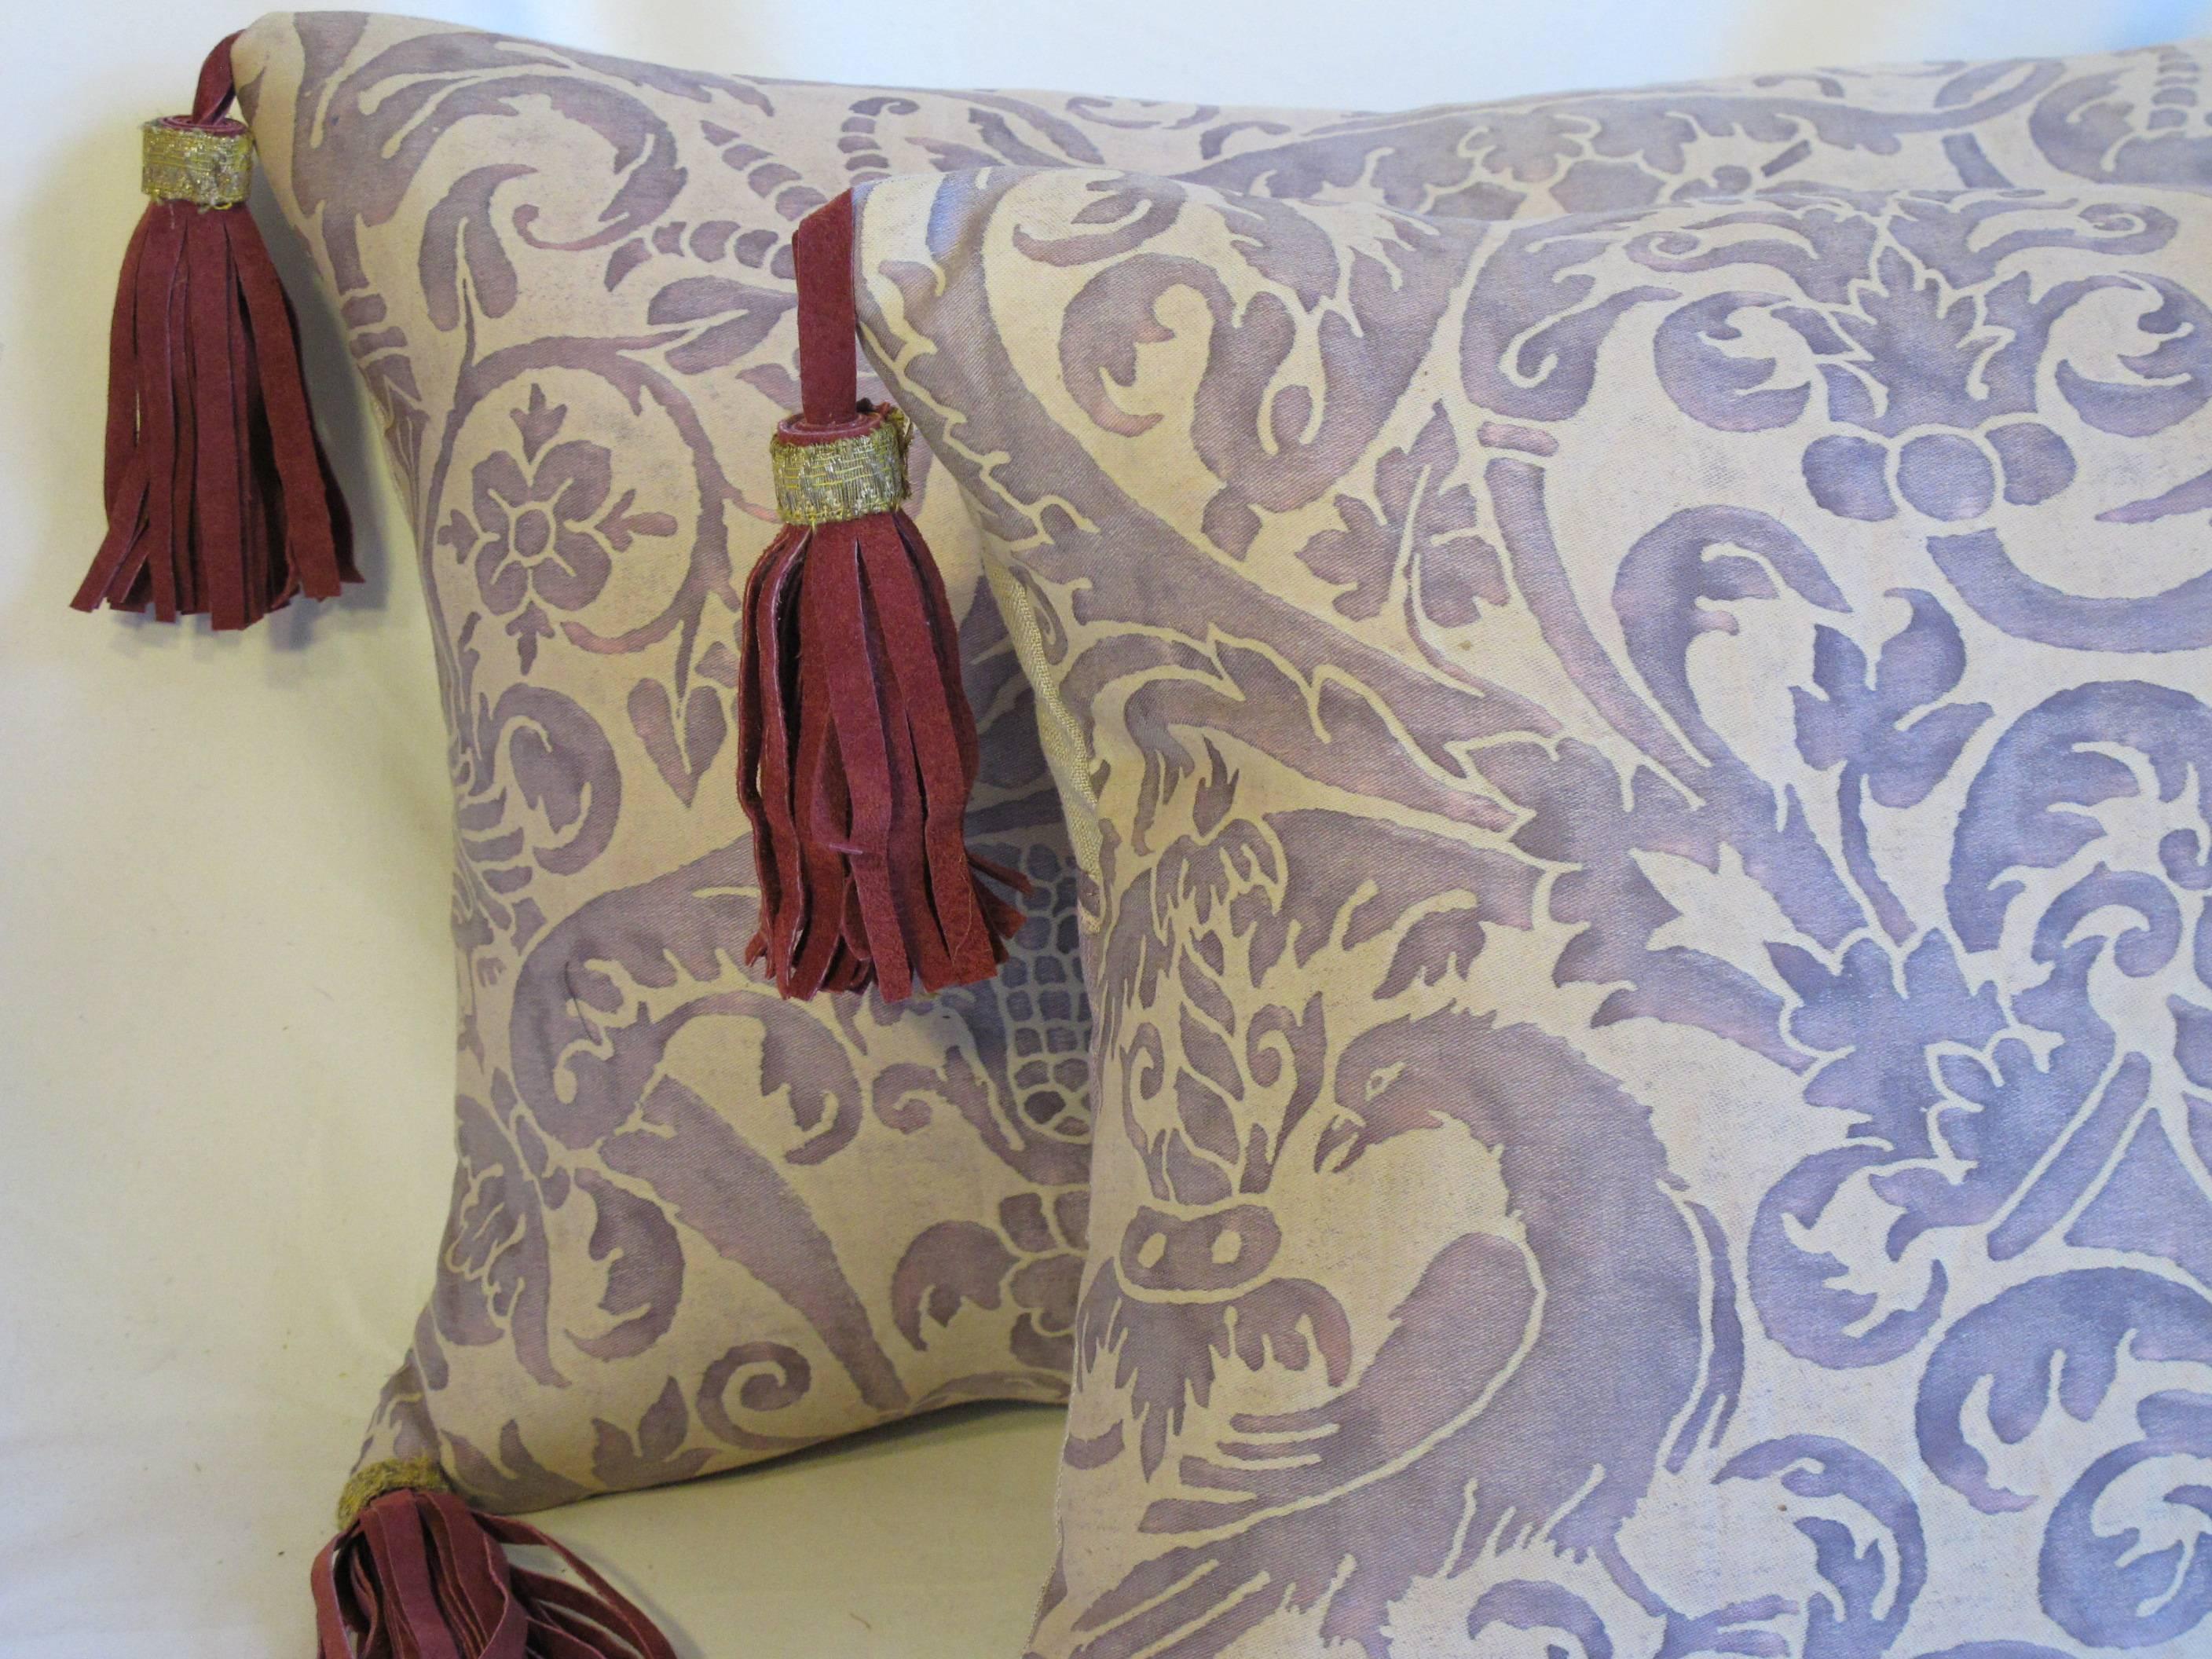 American Vintage Fortuny Pillows by Mary Jane McCarty